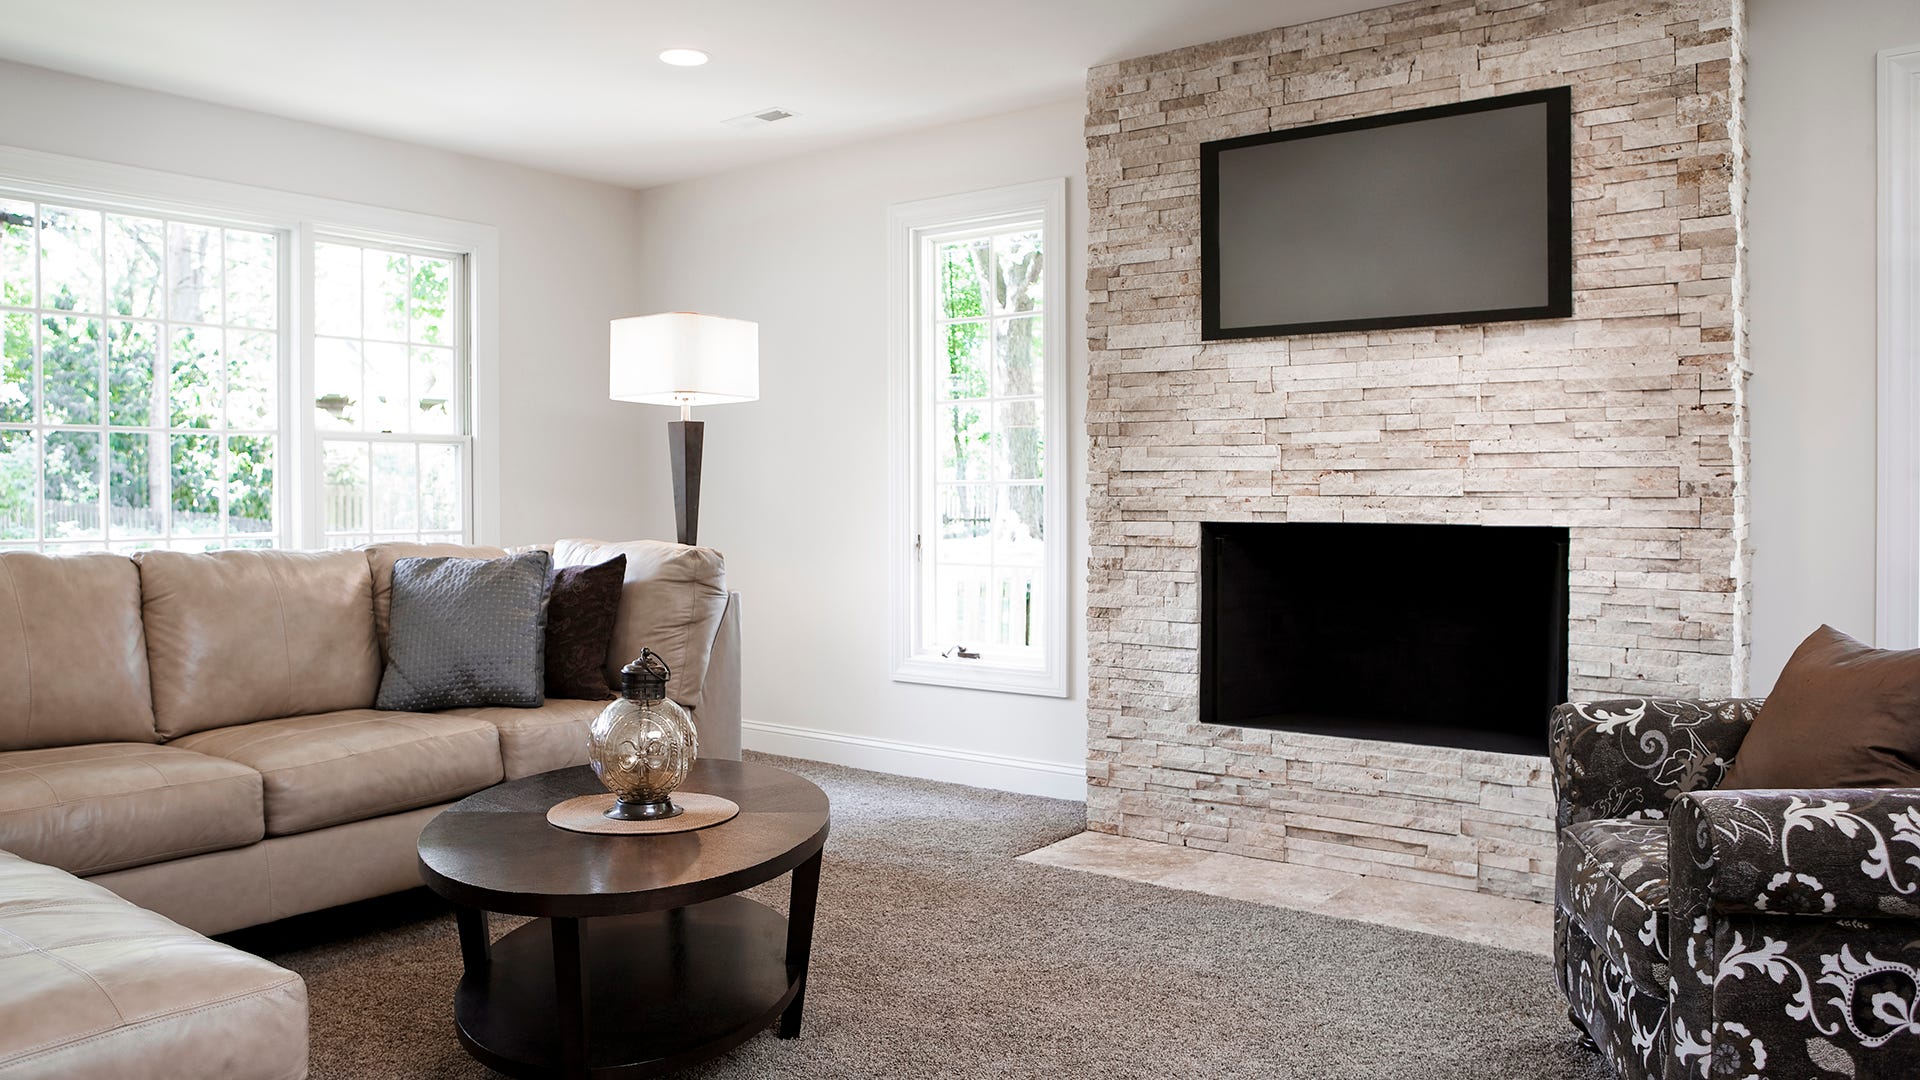 Stop mounting your TVs above the fireplace: Why it’s actually a terrible idea